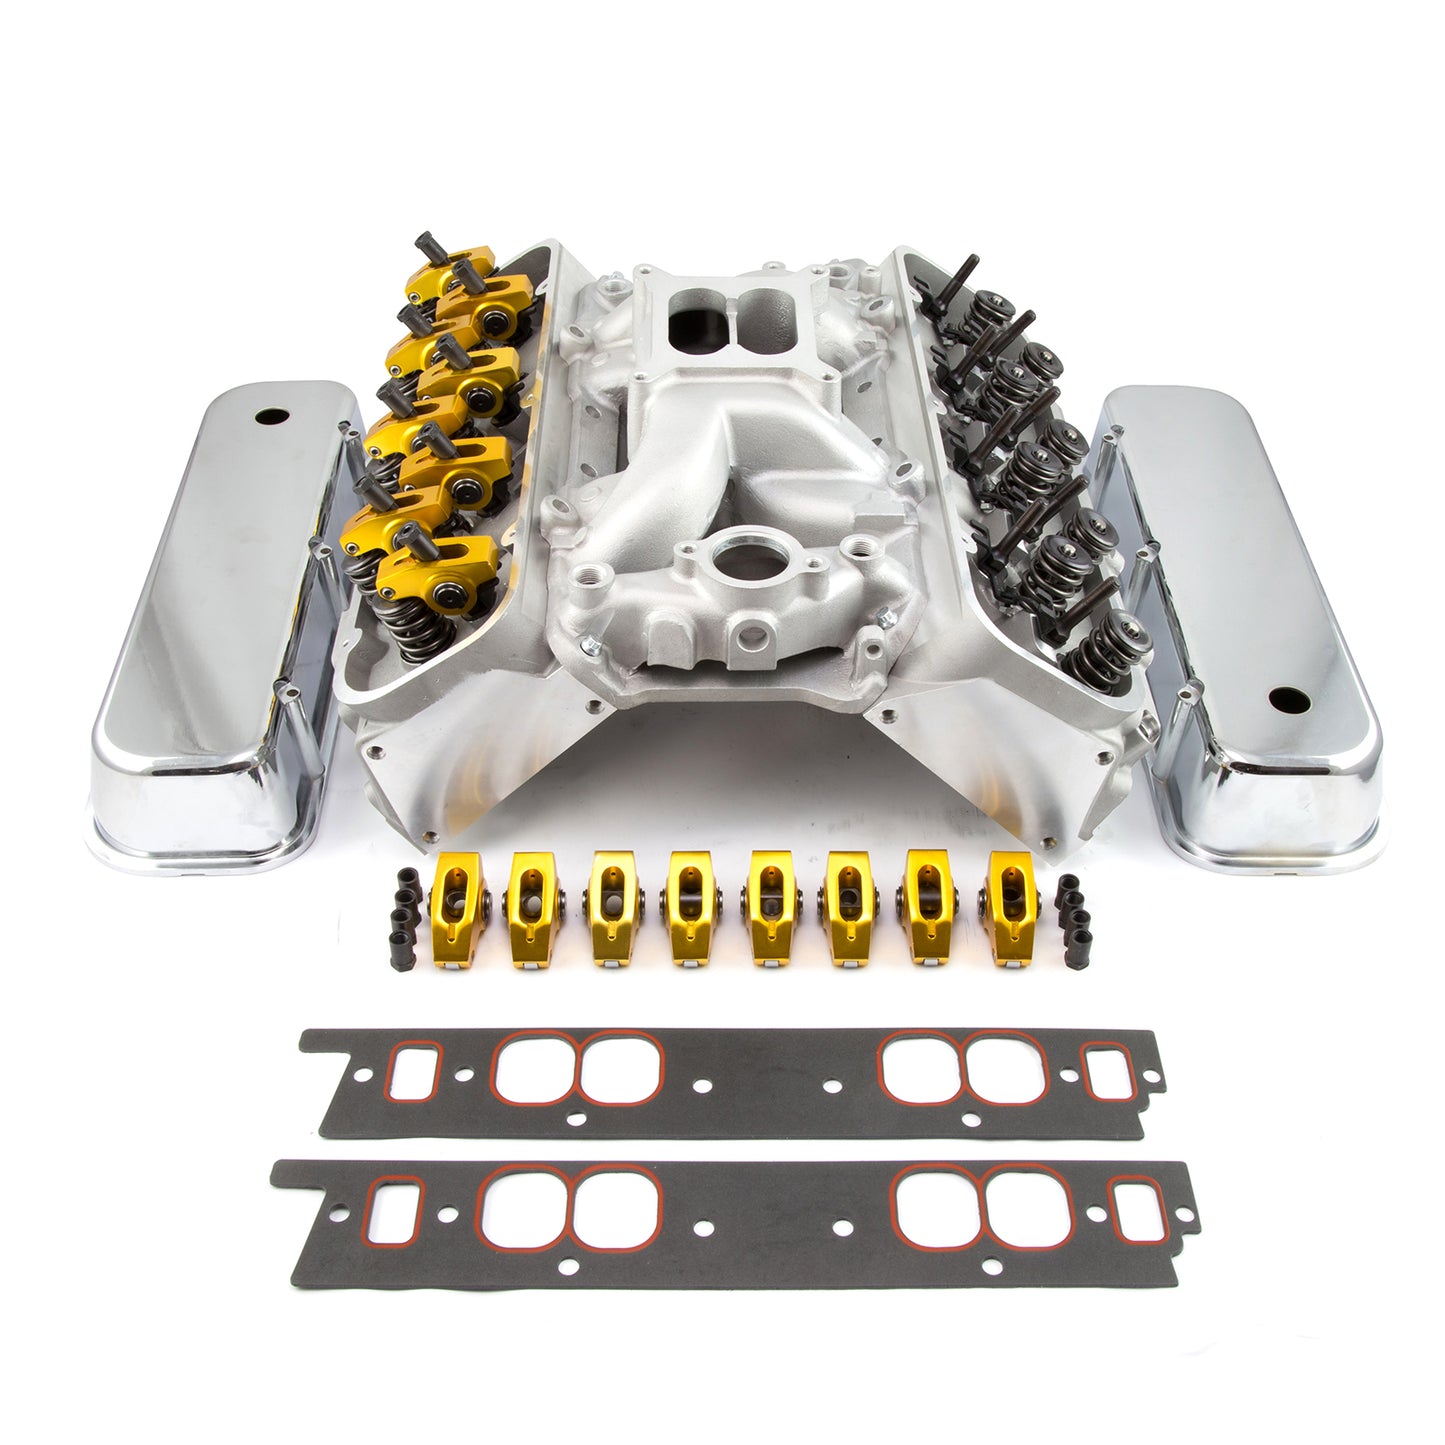 Speedmaster PCE435.1016 Fits Chevy BBC 396 454 Hyd FT Cylinder Head Top End Engine Combo Kit [Oval Port]